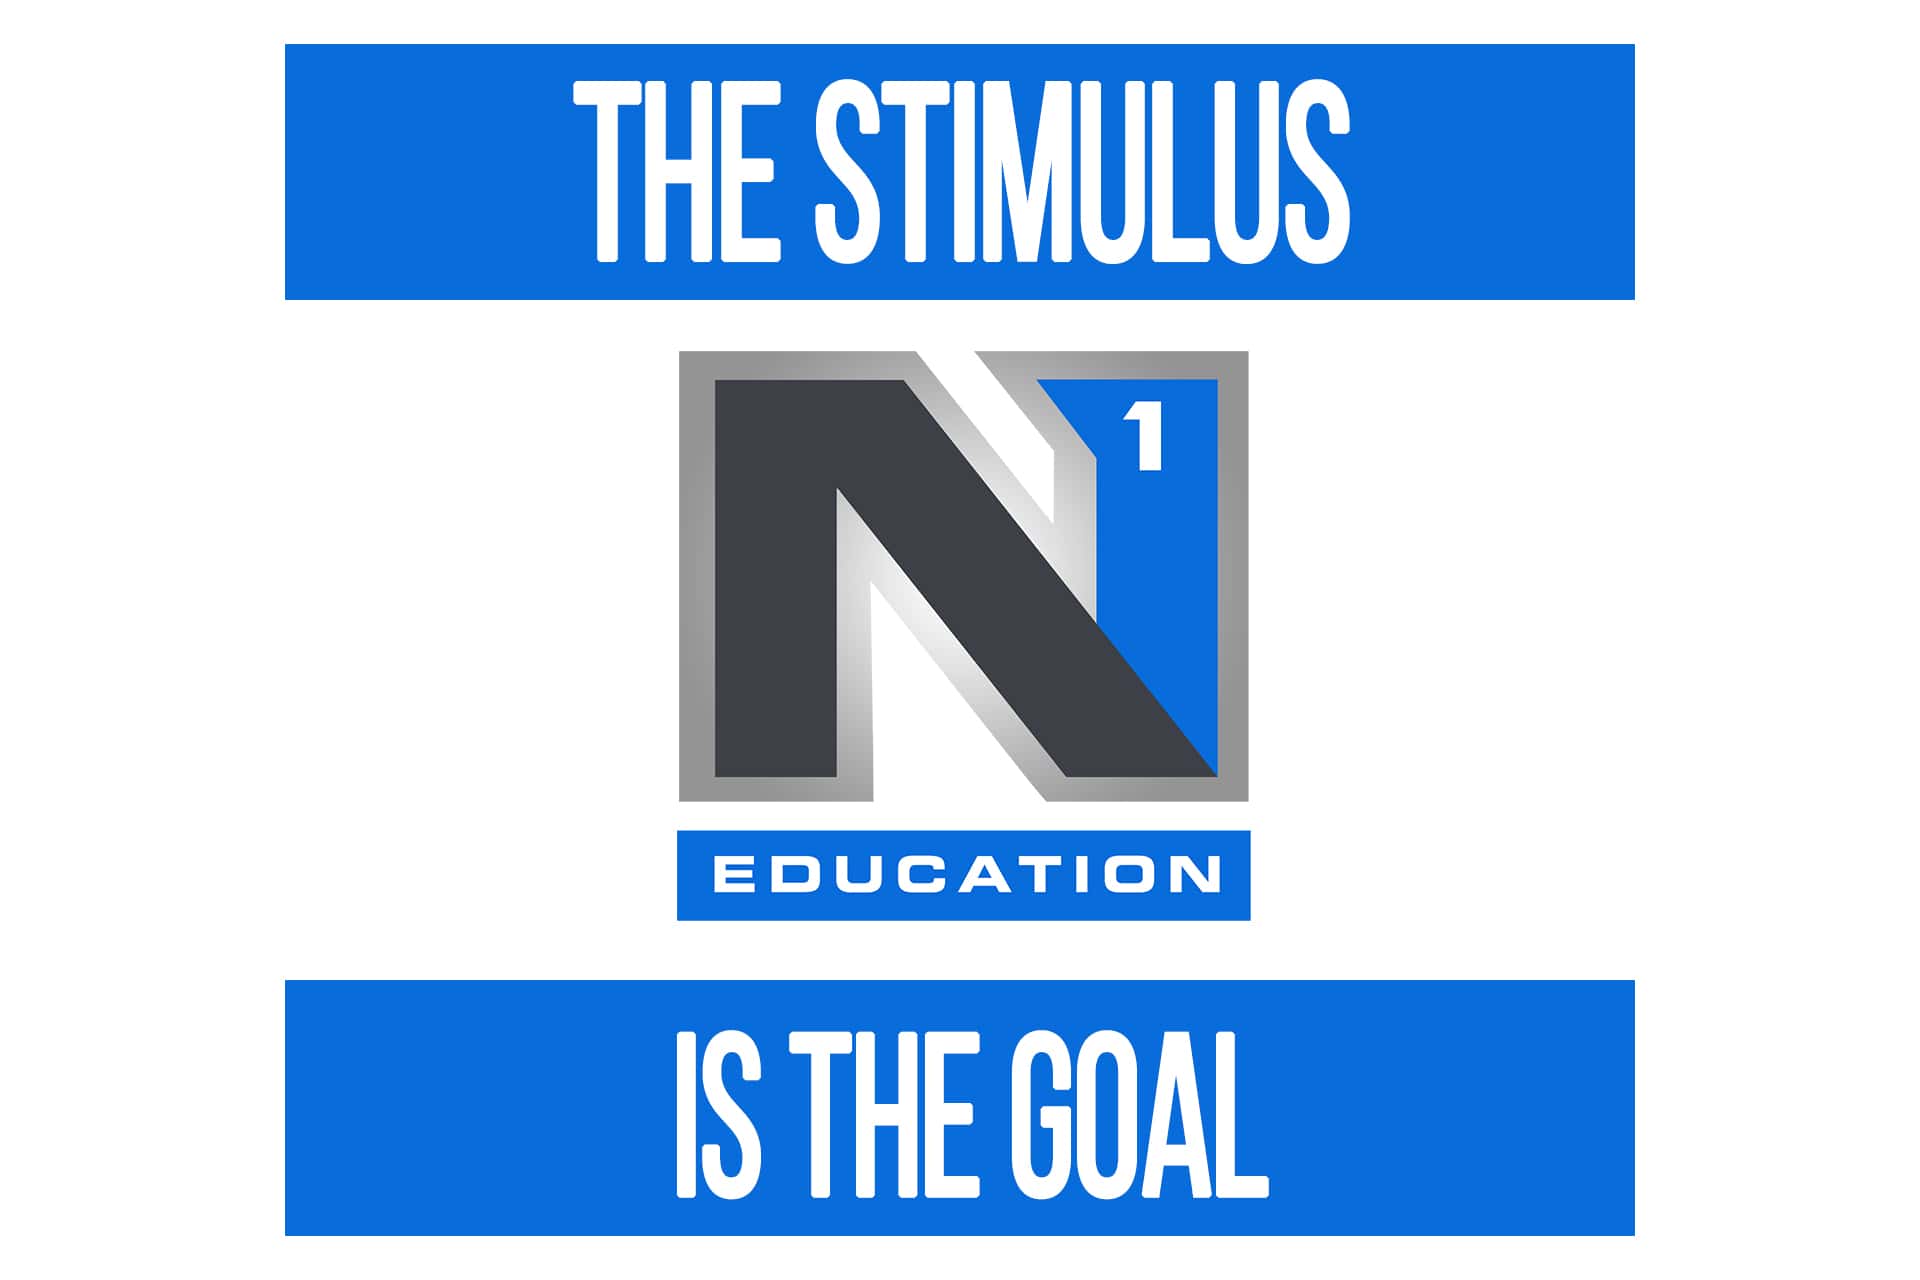 Achieving the Stimulus is Most Important